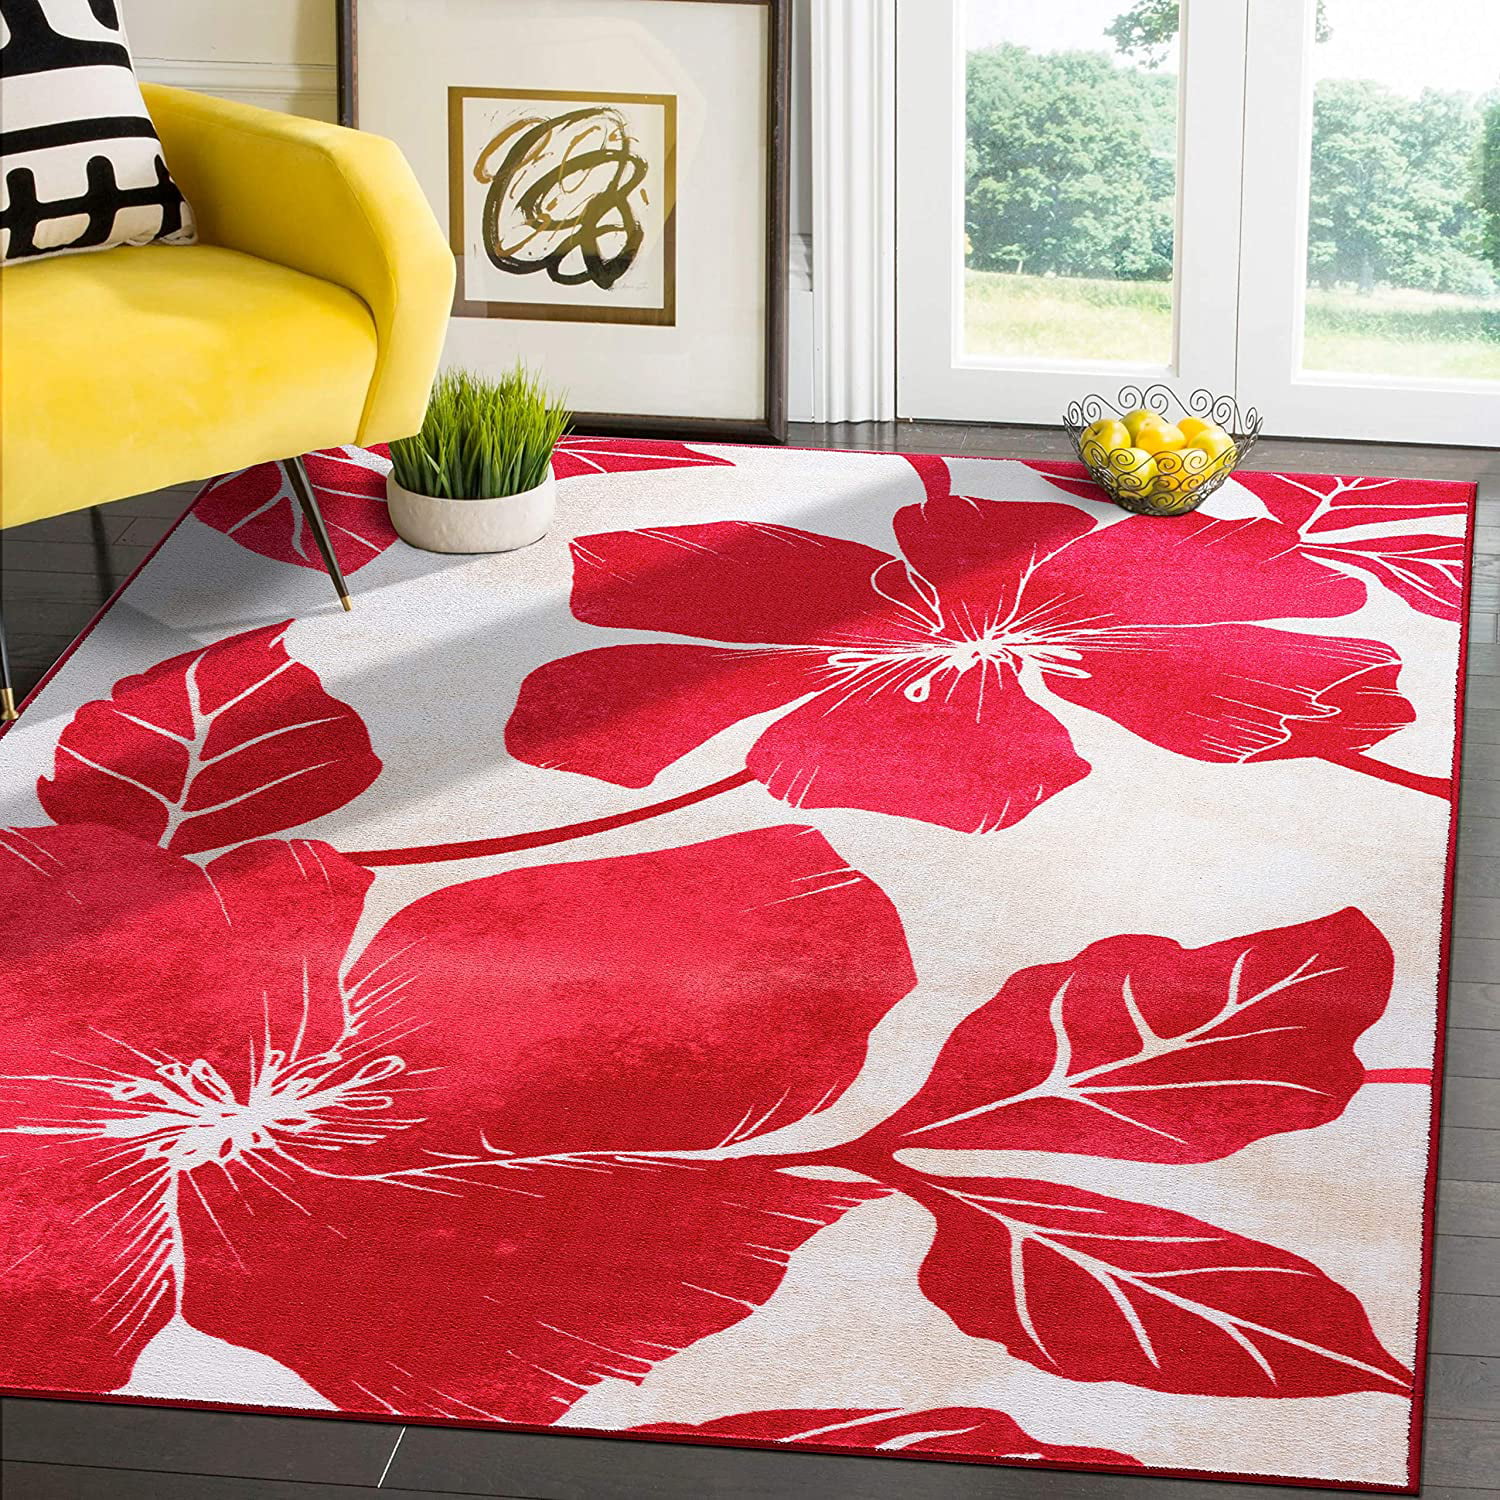 Camilson Modern Fl Area Rug Non, Is A 5×7 Rug Big Enough For Living Room